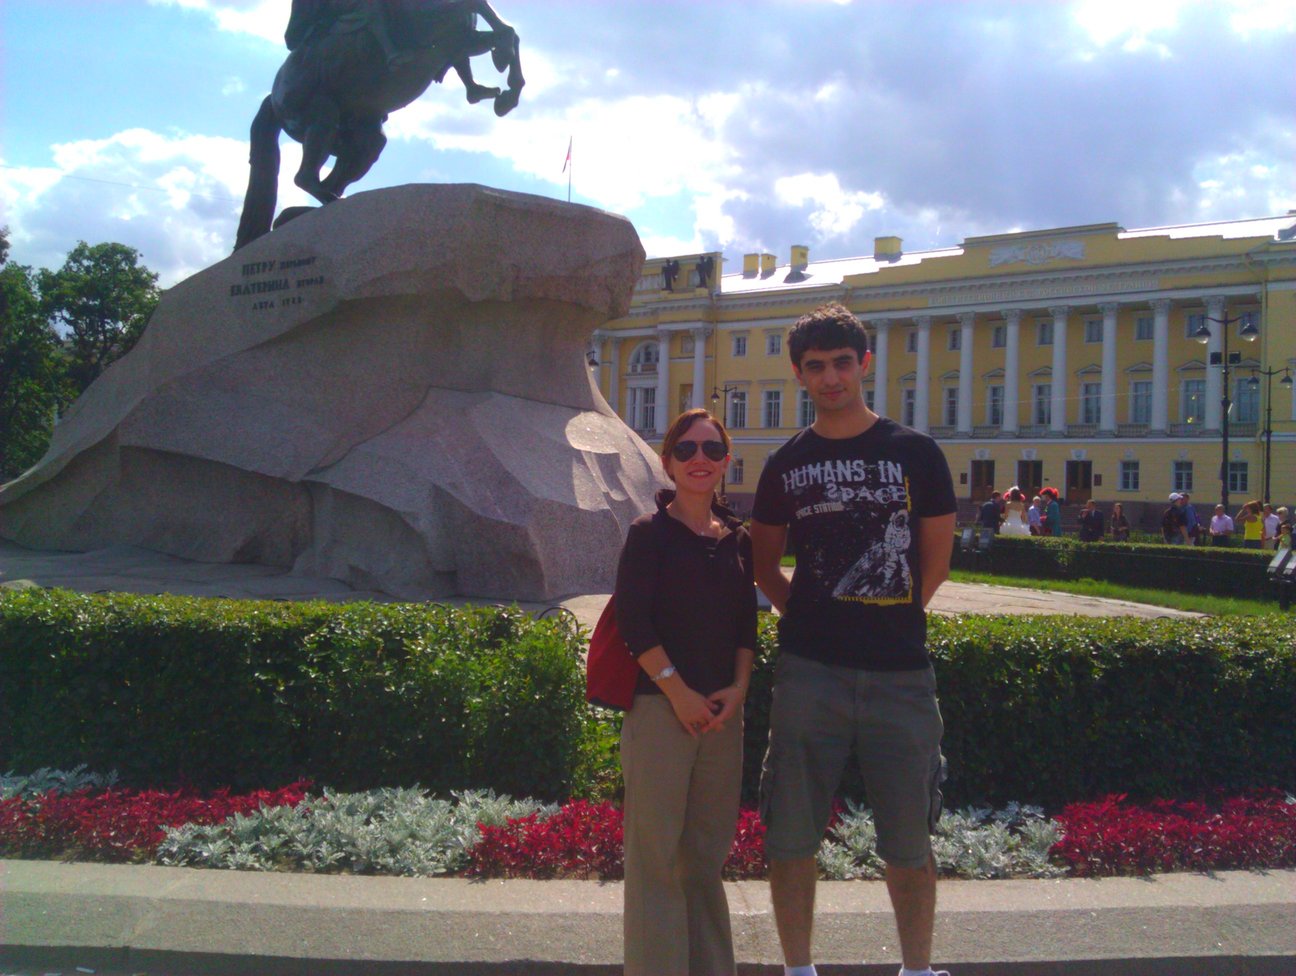  From ISIT 2011 in St Petersburg, Russia